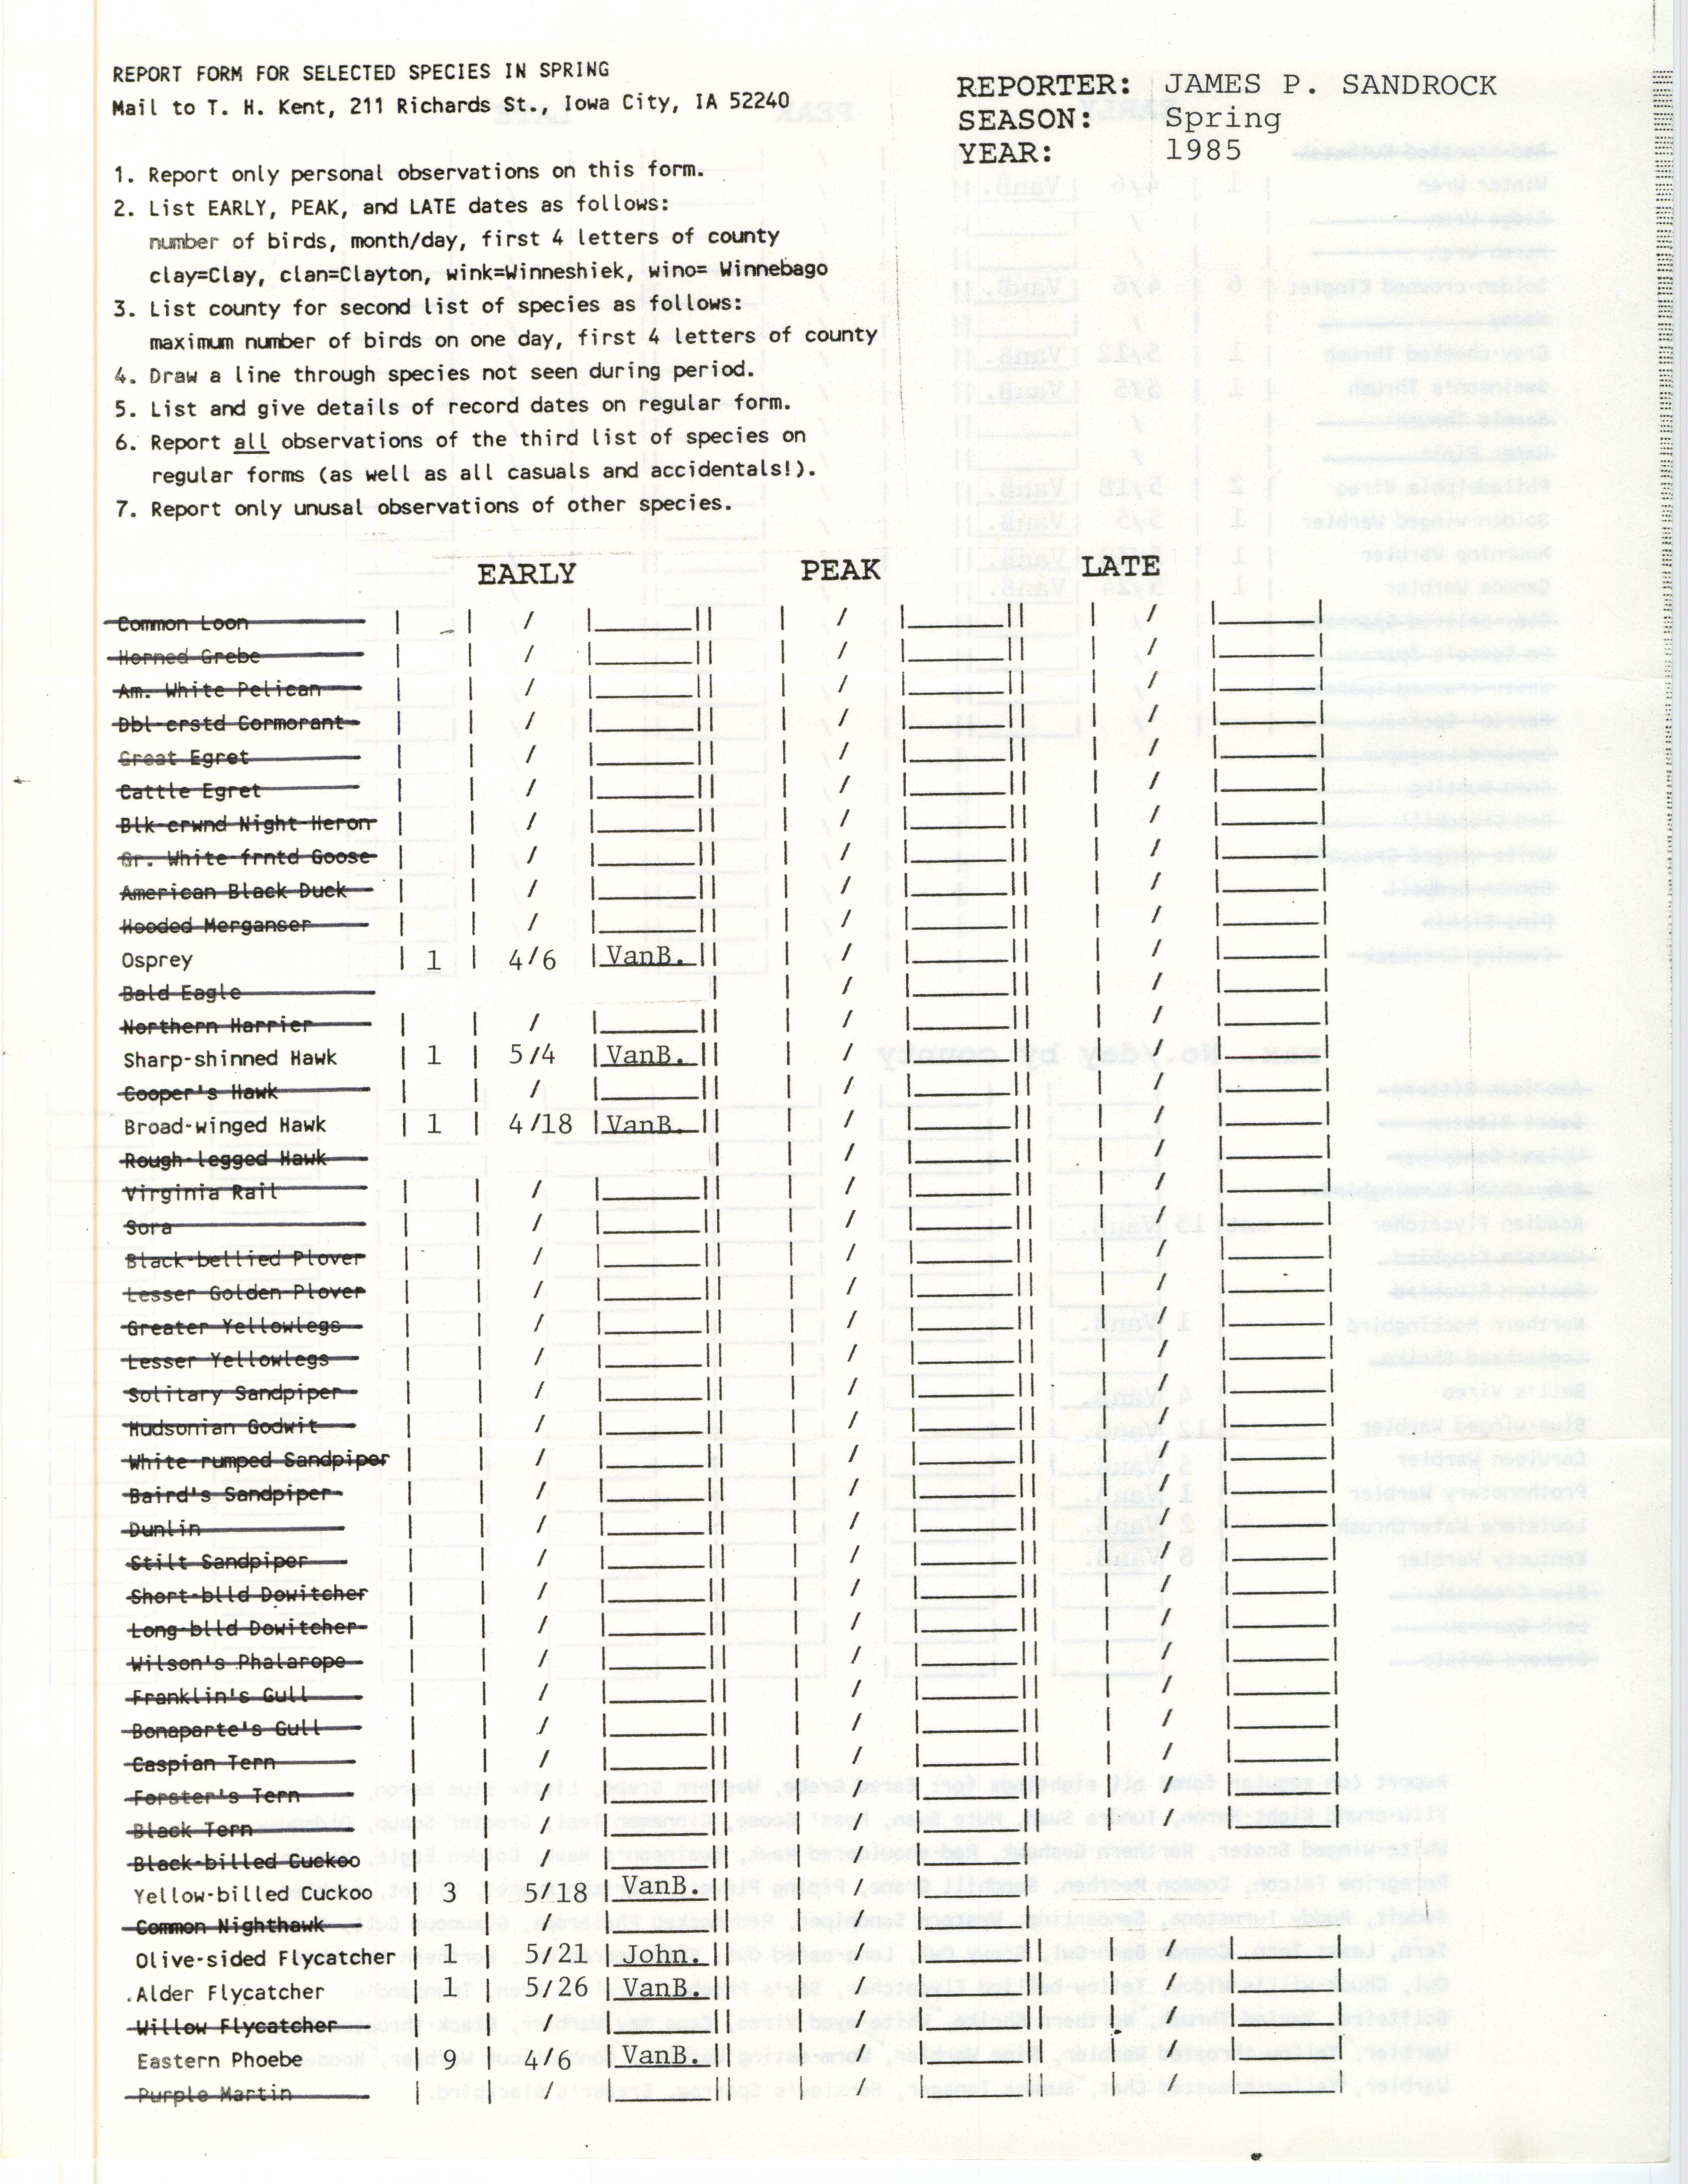 Report form for selected species in spring, contributed by James P. Sandrock, spring 1985